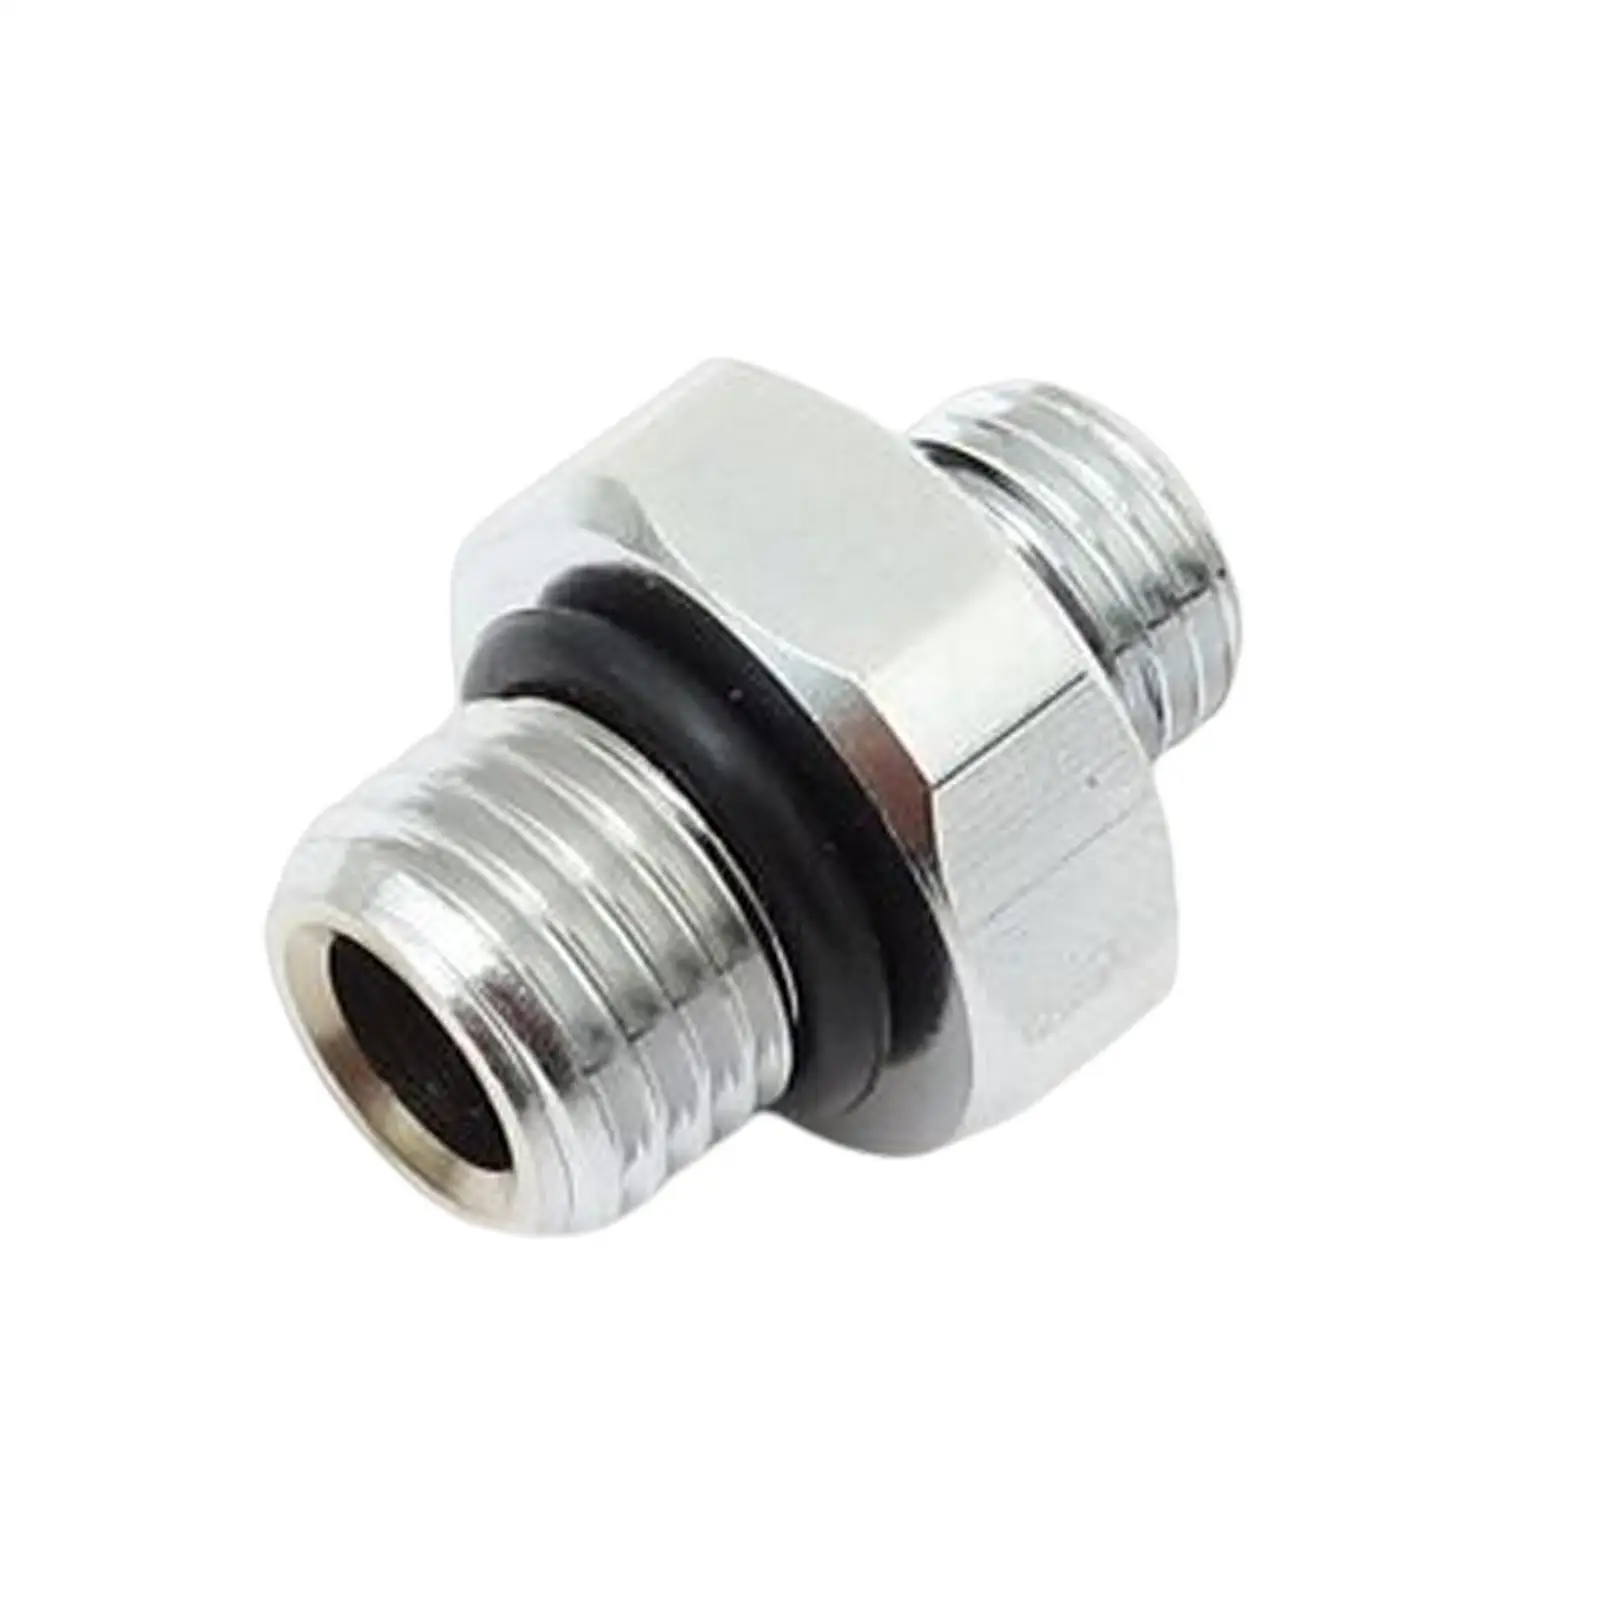 7/16-20HP and 3/8-24LP BCD Connector, Adaptor Metal Scuba Diving Dive for Snorkeling Diver Surfing Diving Equipment